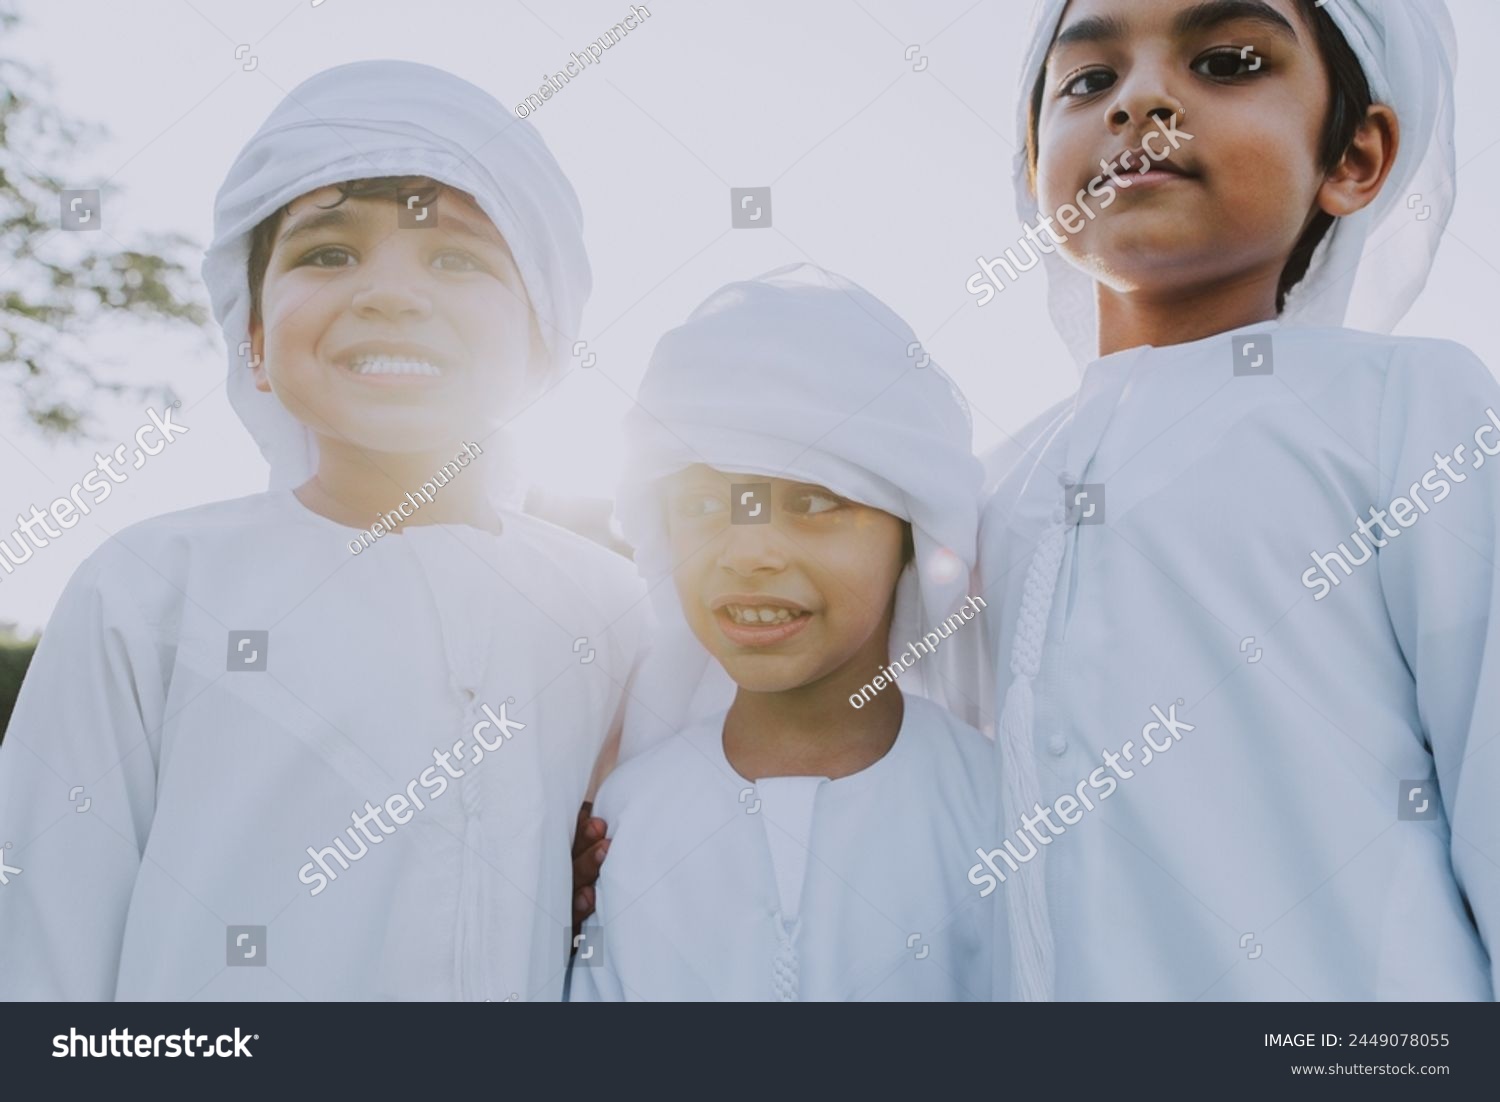 Children playing together in Dubai in the park. Three children with dish dasha look into the camera smiling. Emirati people wearing traditional kandura white dress. #2449078055